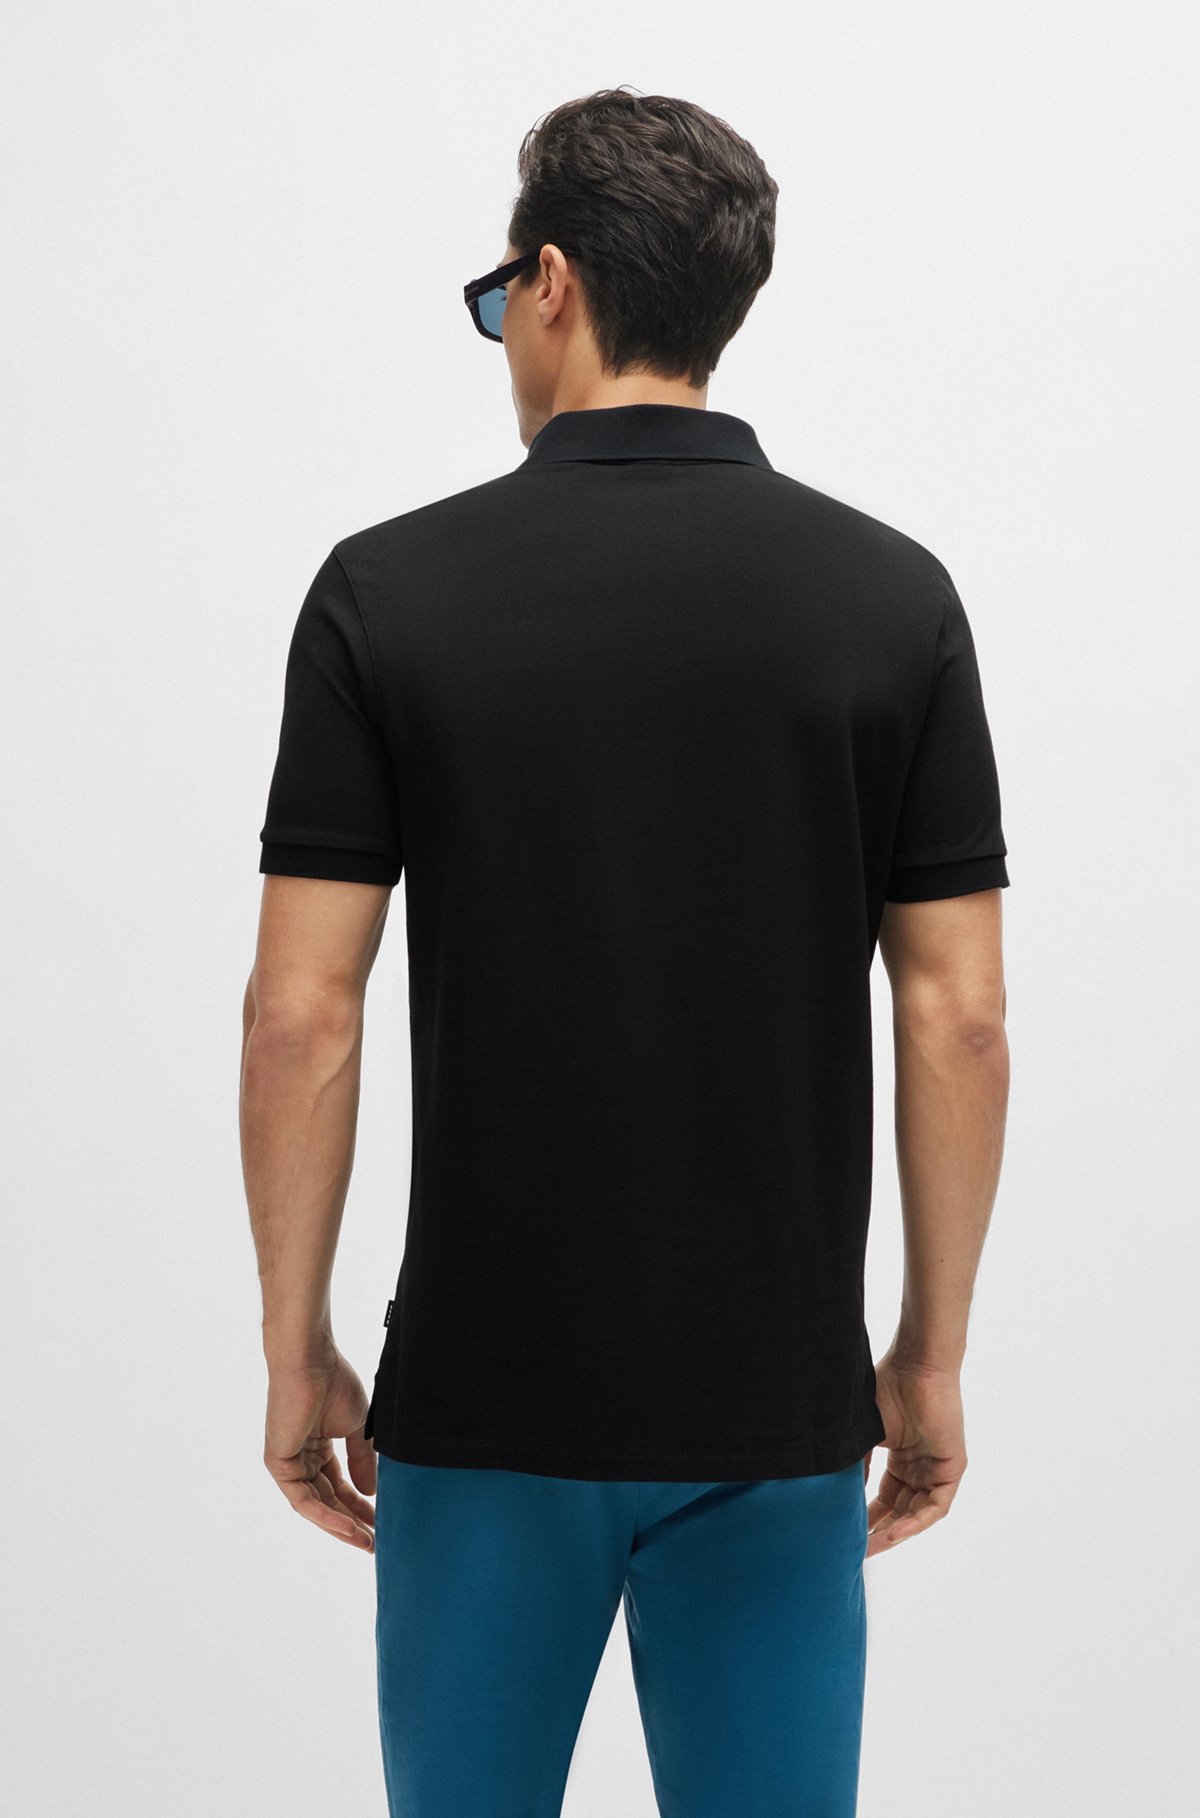 Regular-fit polo shirt in cotton with embroidered logo, Black